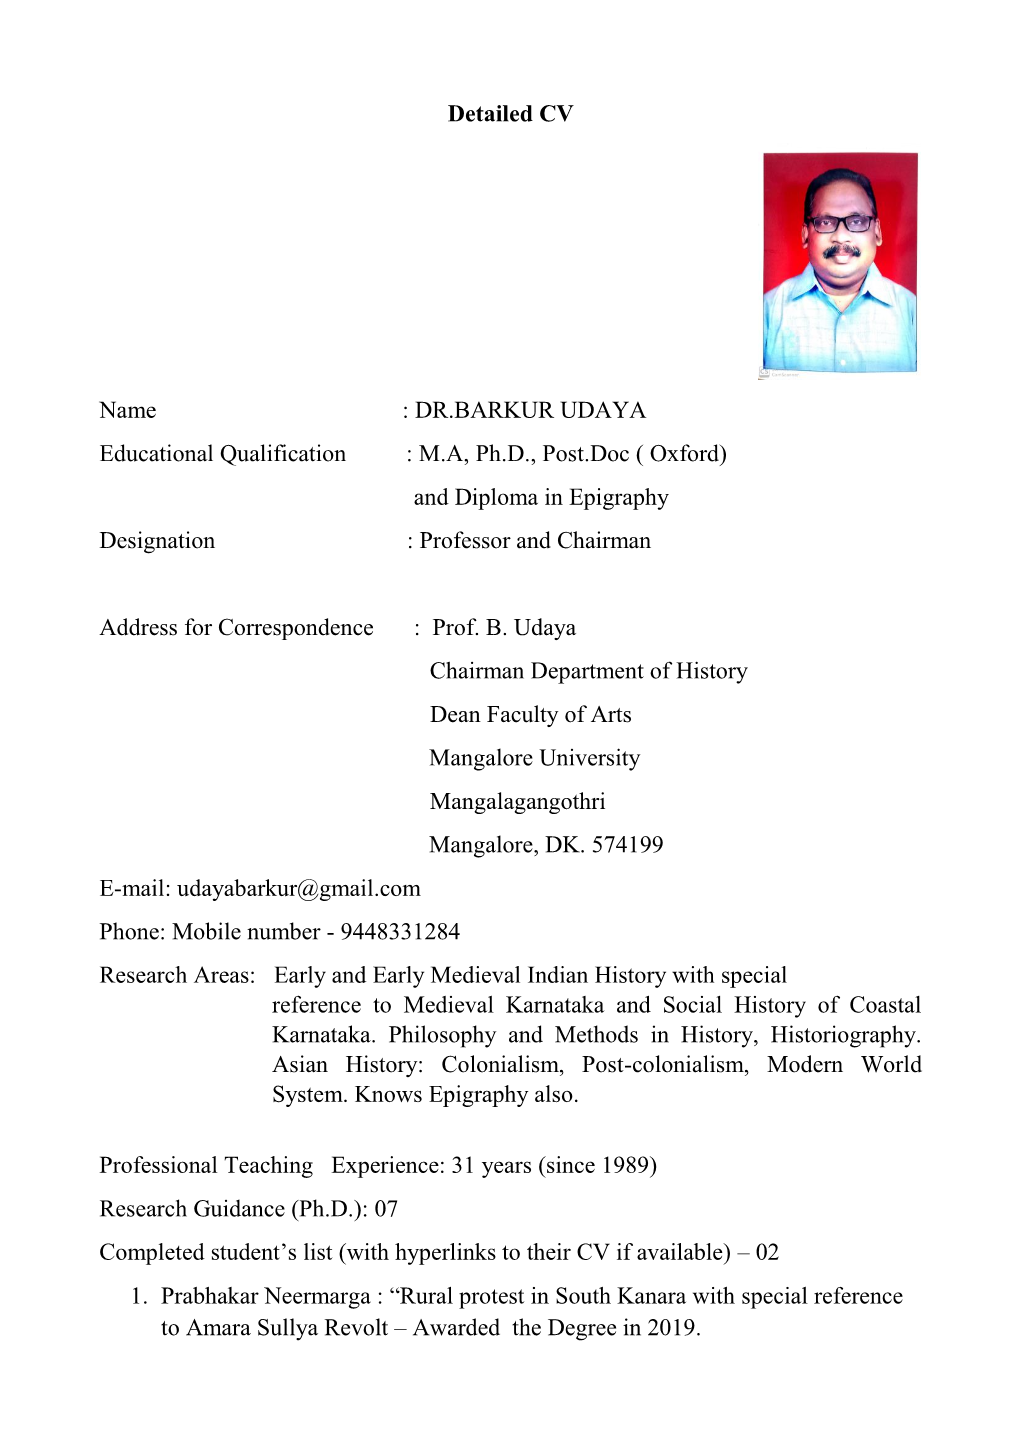 DR.BARKUR UDAYA Educational Qualification : M.A, Ph.D., Post.Doc ( Oxford) and Diploma in Epigraphy Designation : Professor and Chairman